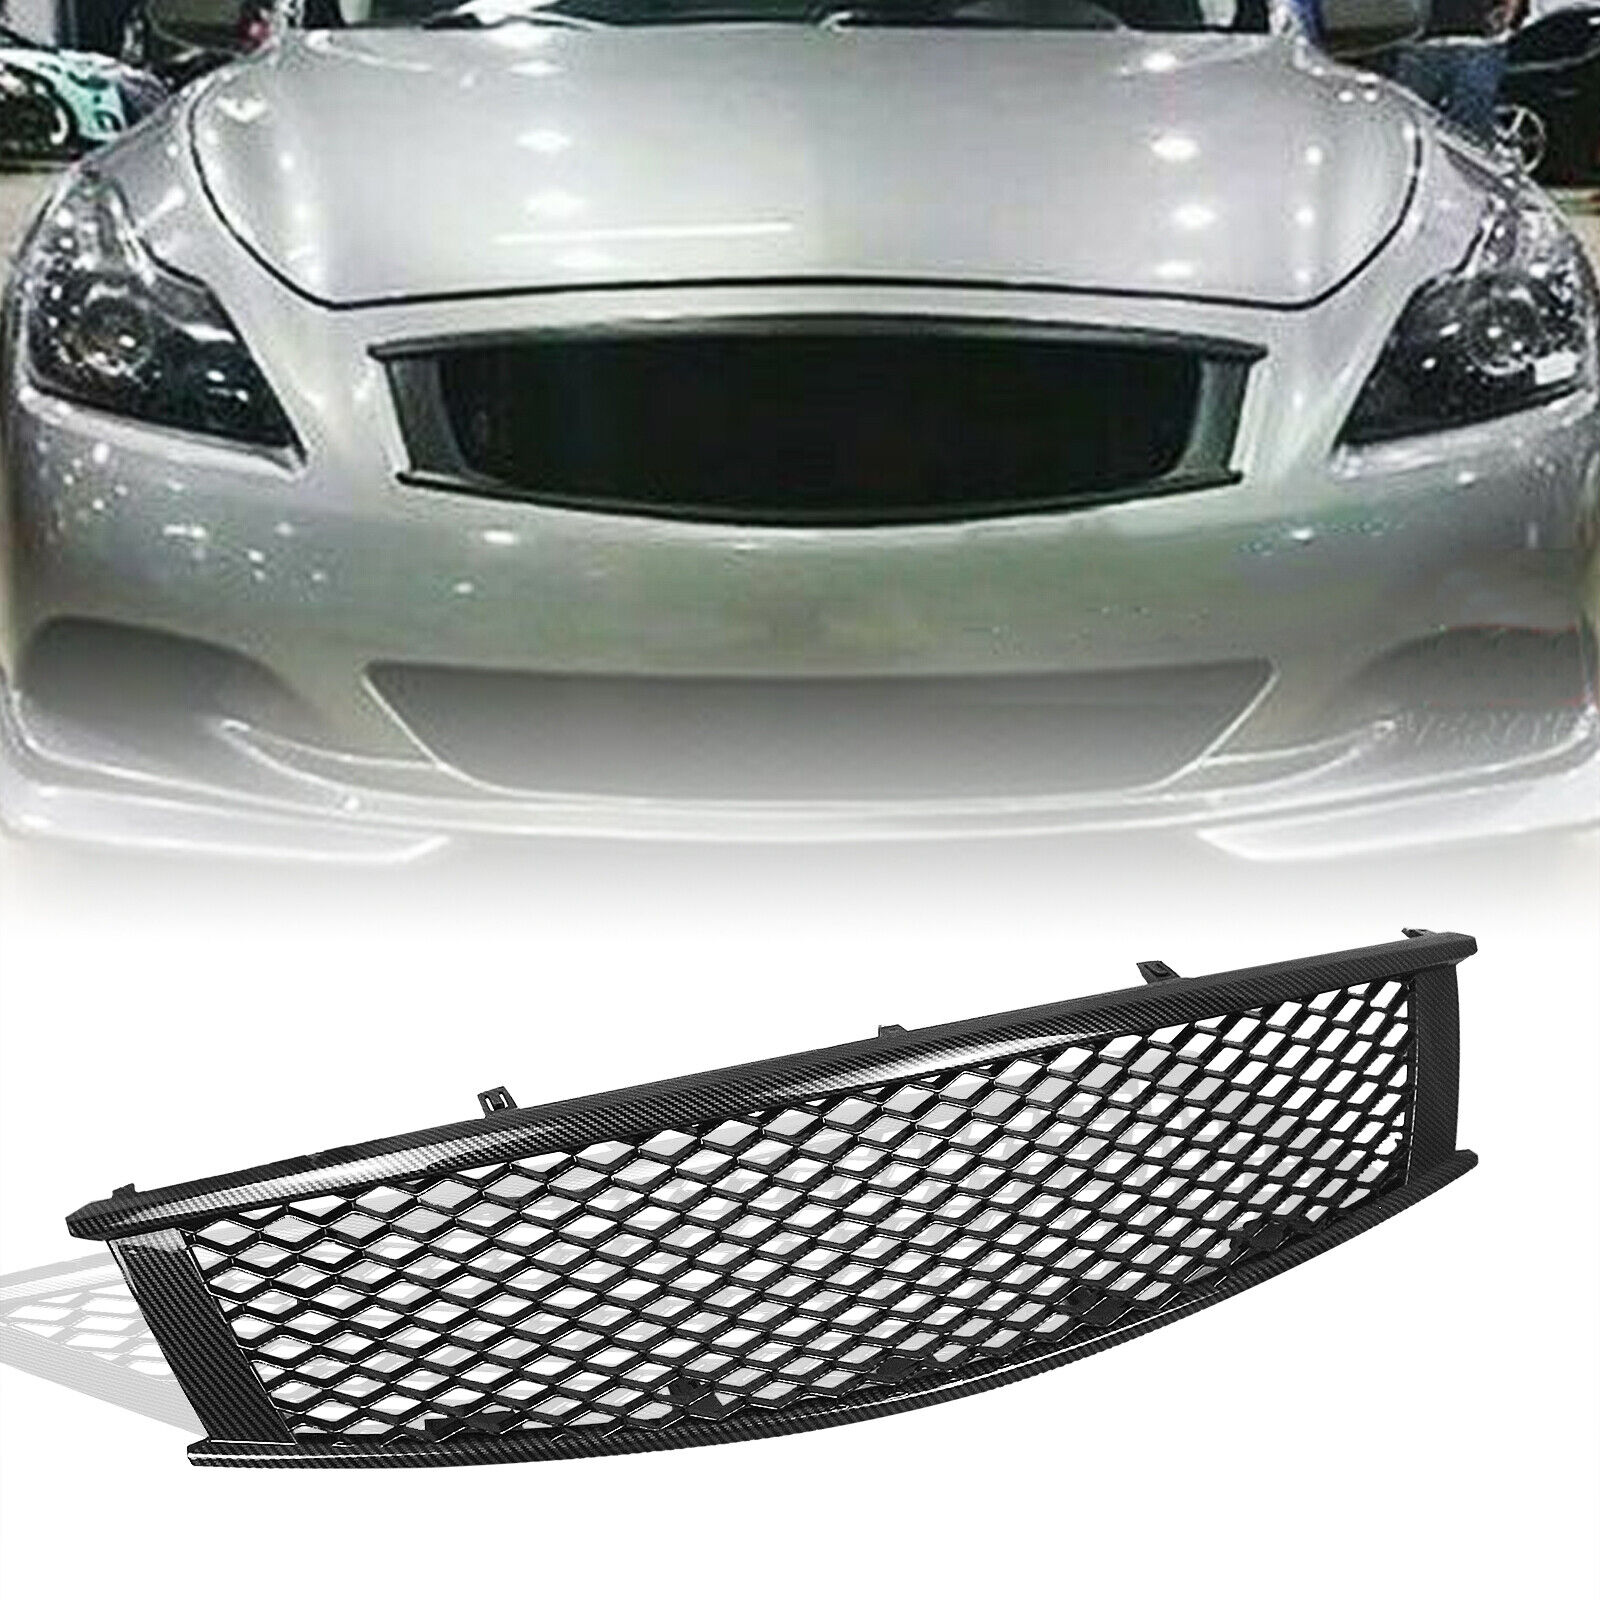 1x Front Bumper Grille For Nissan Skyline Infiniti G37 2-Door 2008-2013 Coupe